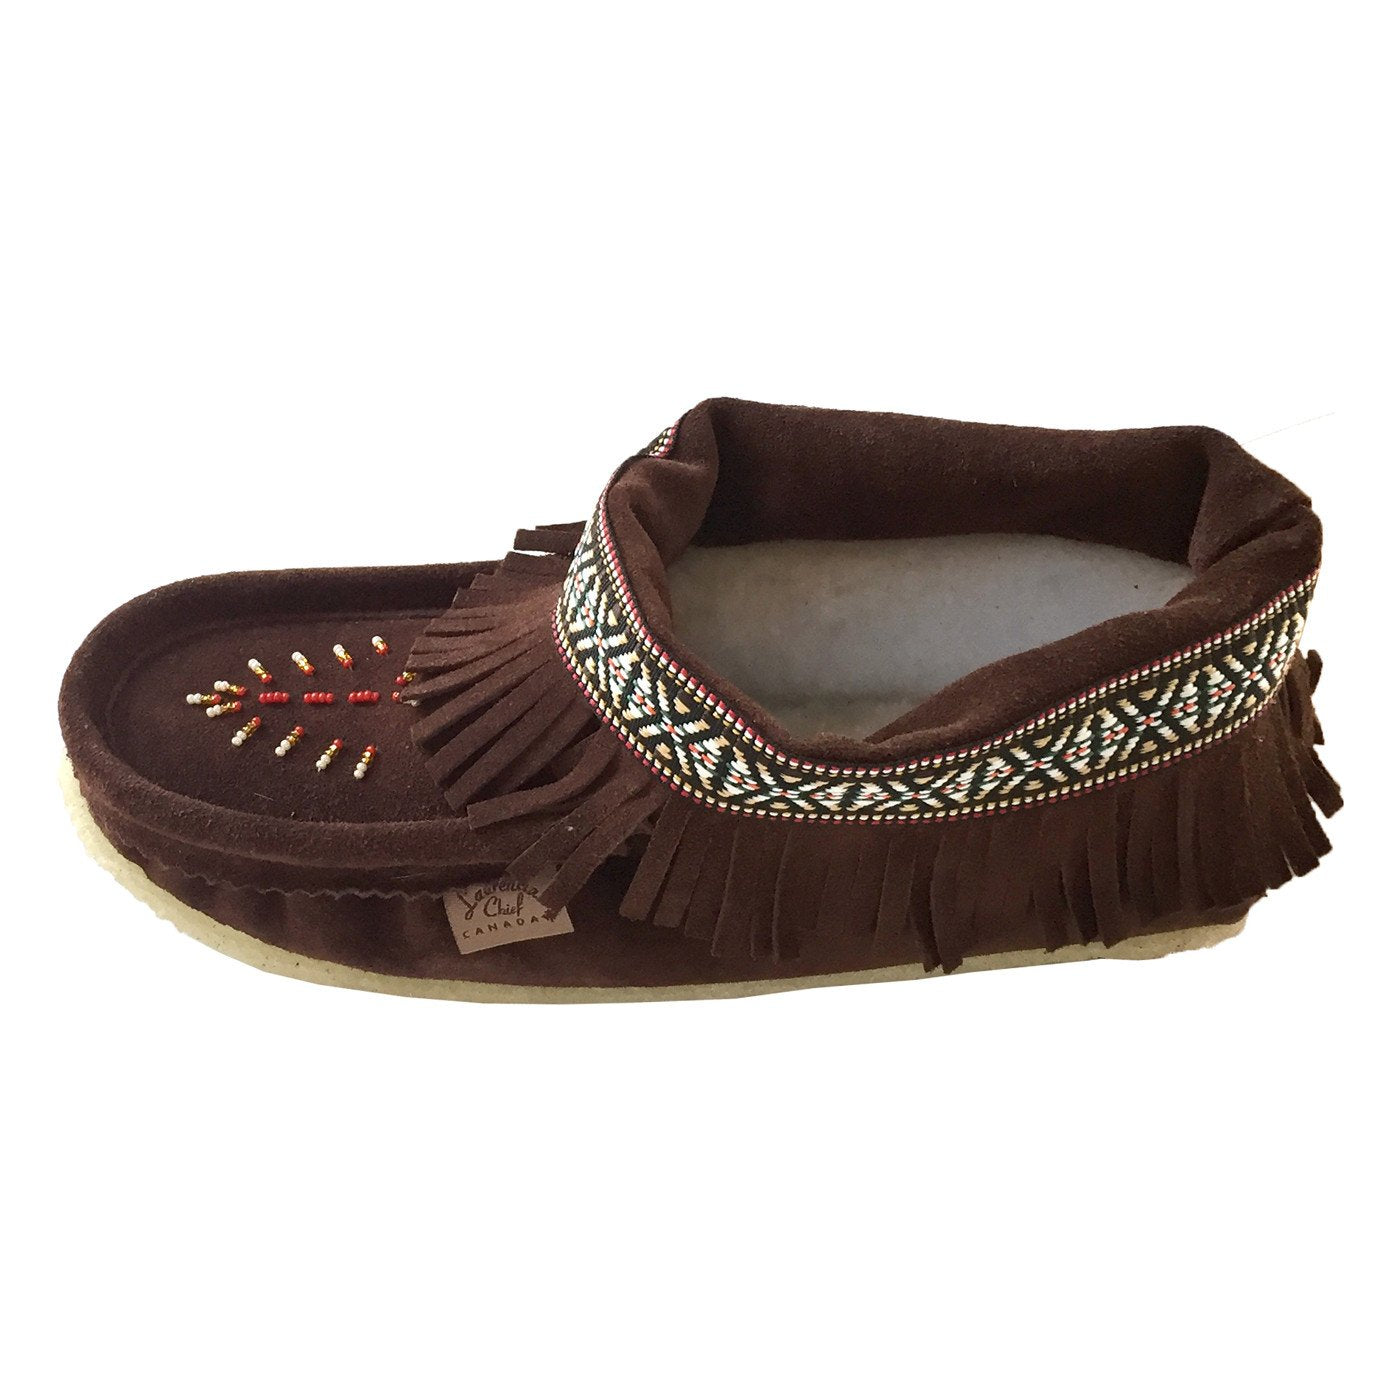 Women's Suede Fringed Lined Moccasin Shoes